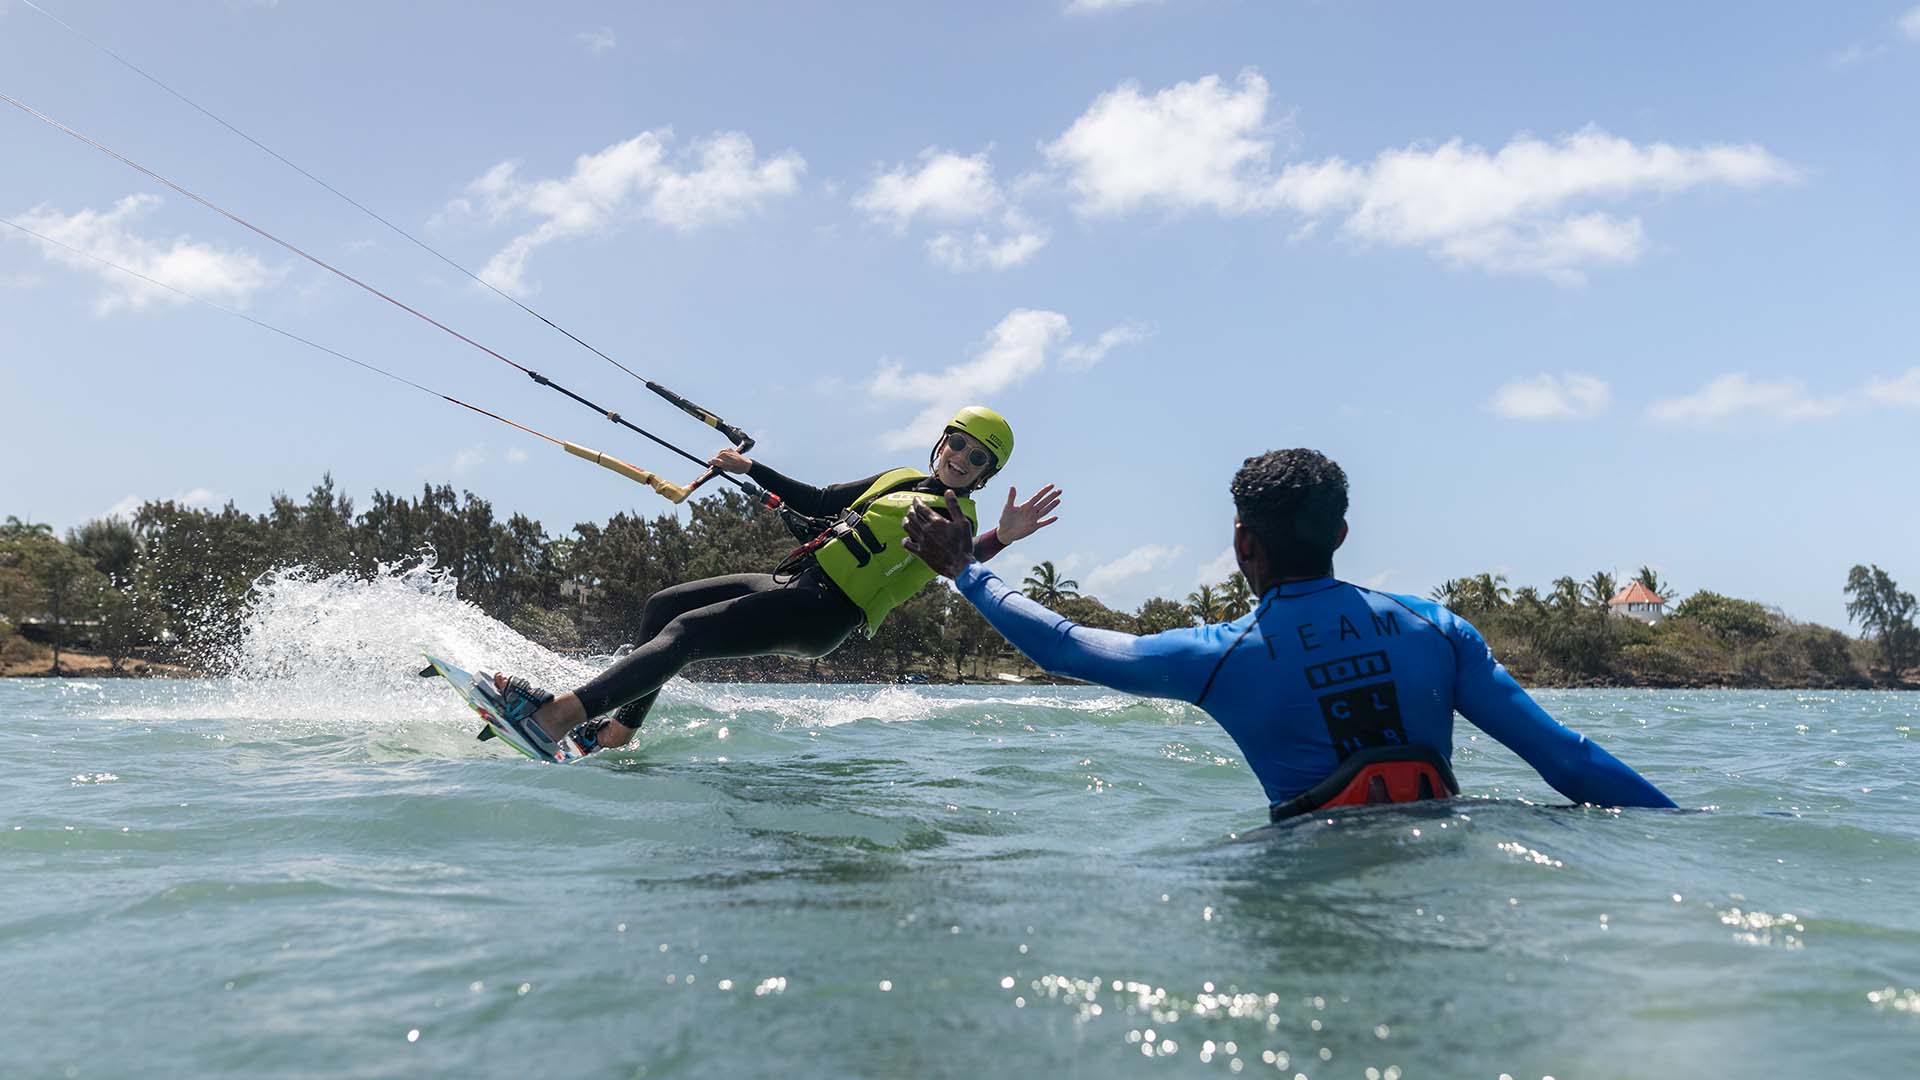 kitesurf lessons in turquoise water of mauritius